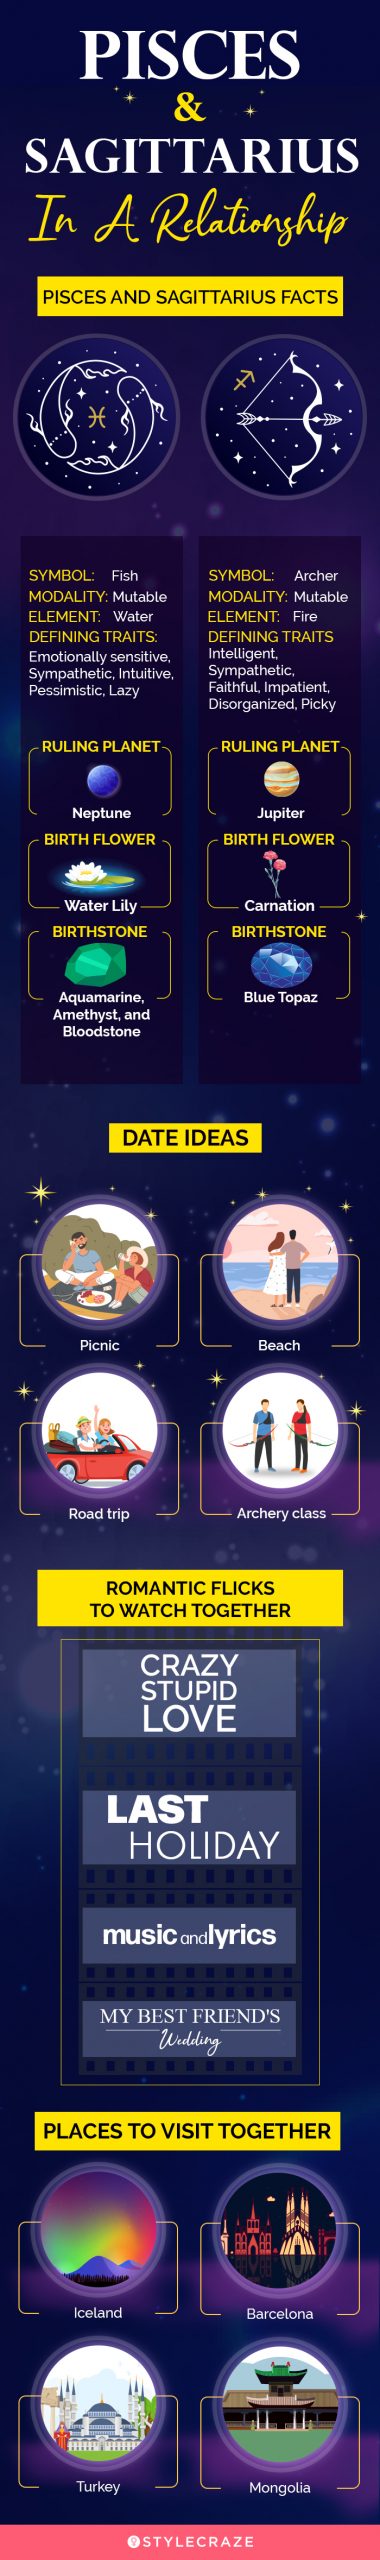 pisces and sagittarius in a relationship [infographic]